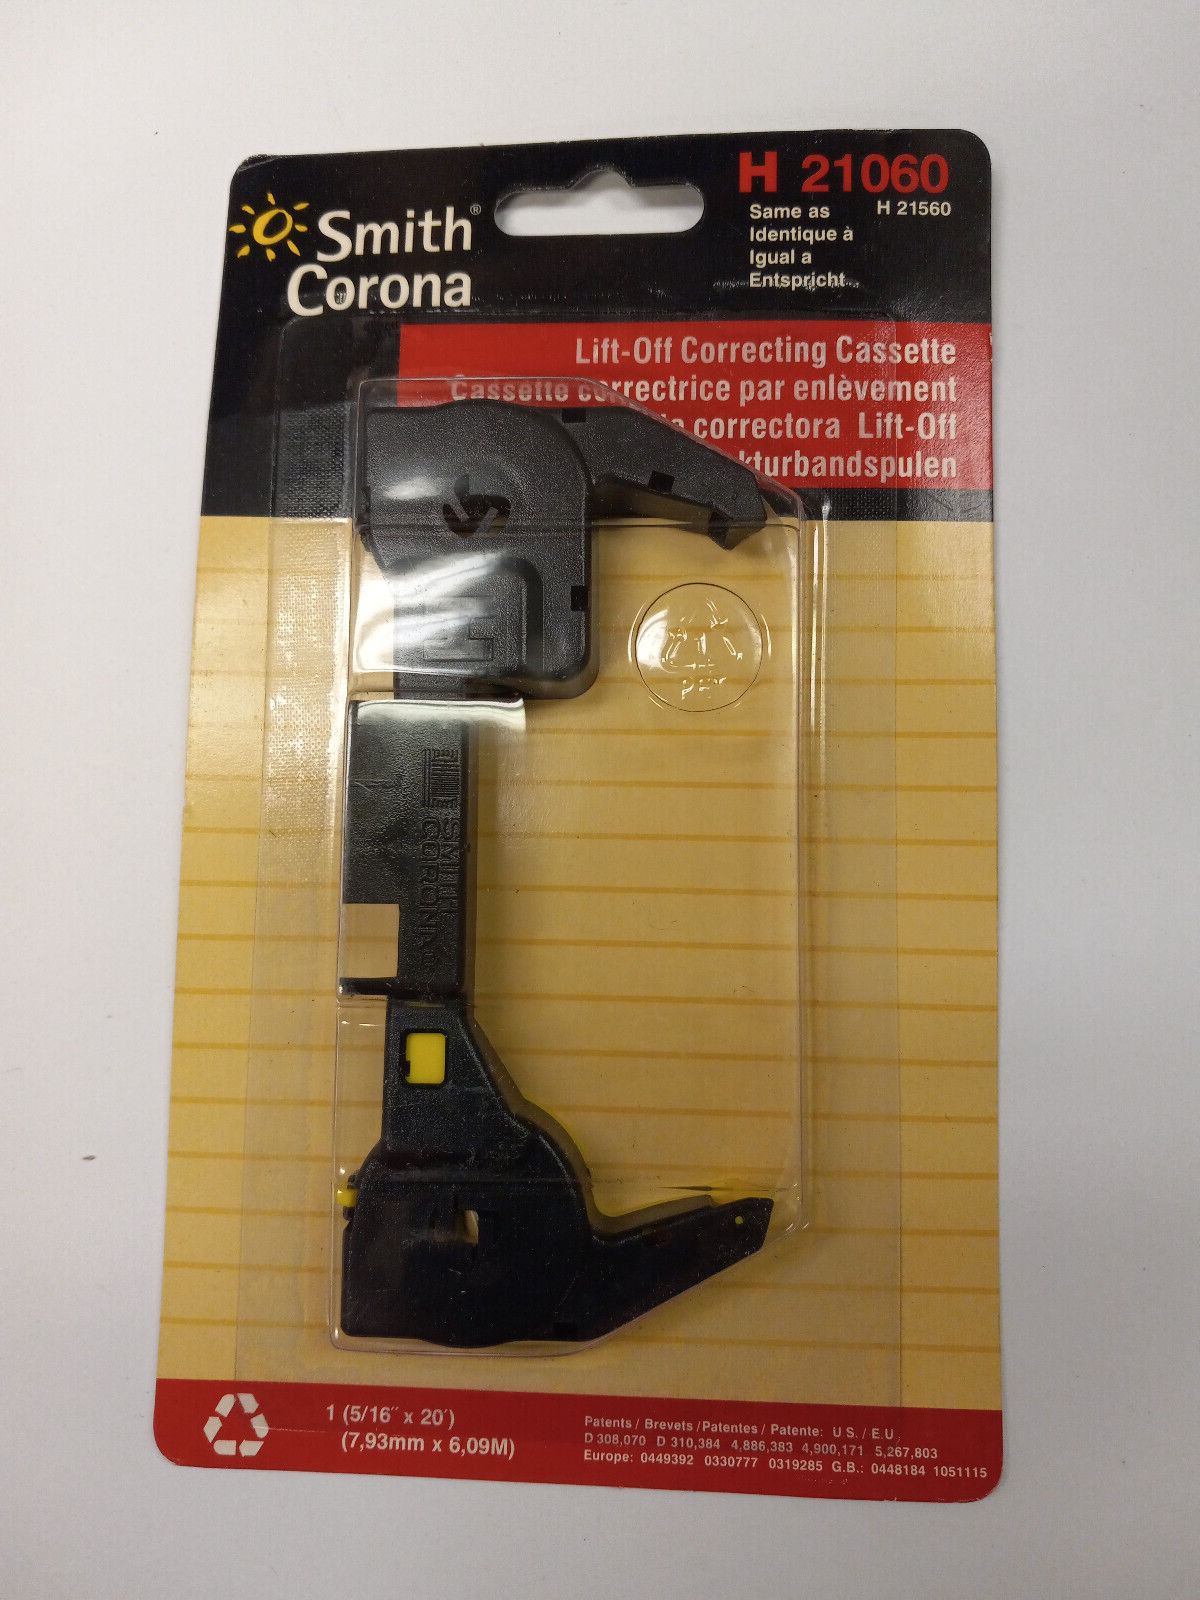 Smith Corona Lift-Off Correcting Cassette H Series H21060 H21560 H63412